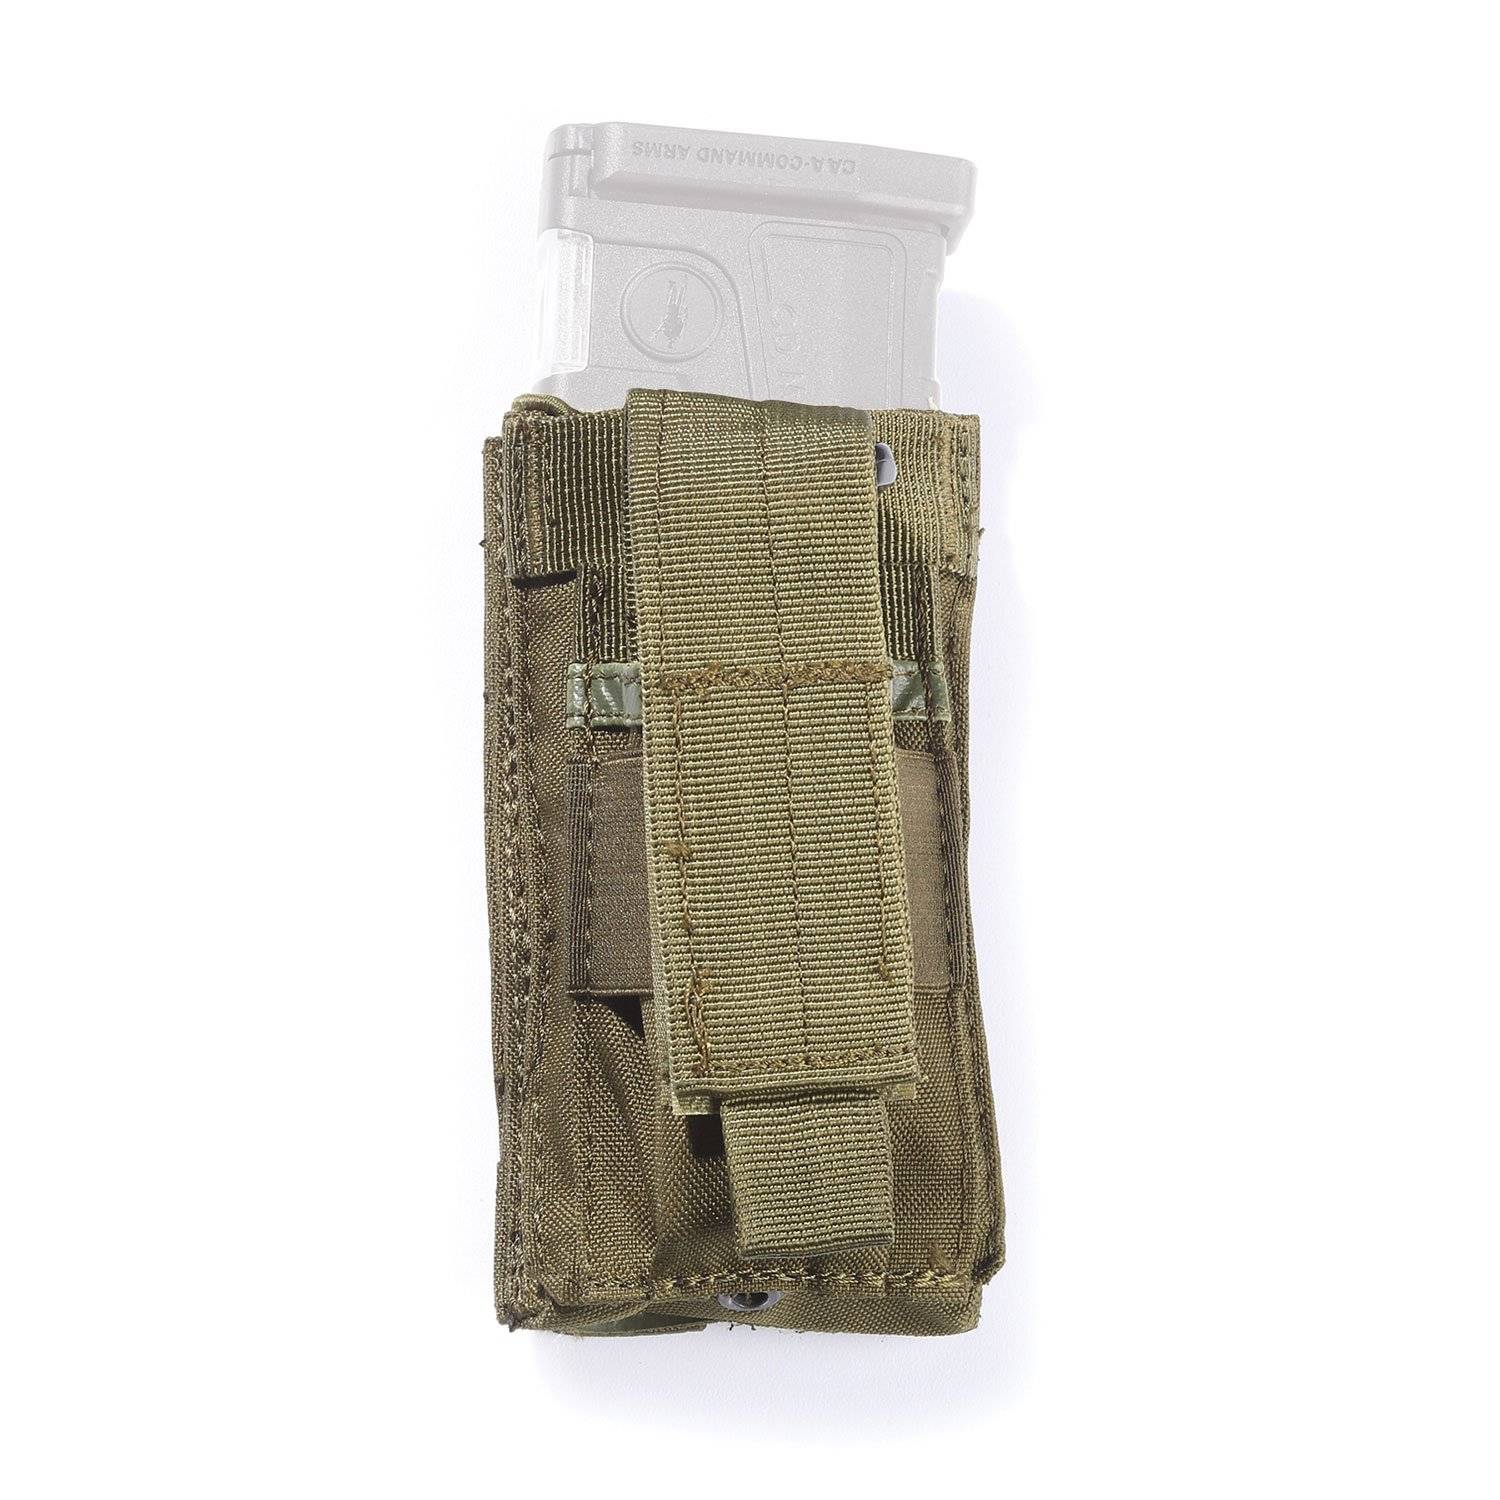 5IVE STAR GEAR SINGLE OPEN TOP M4/M16 MAG POUCH